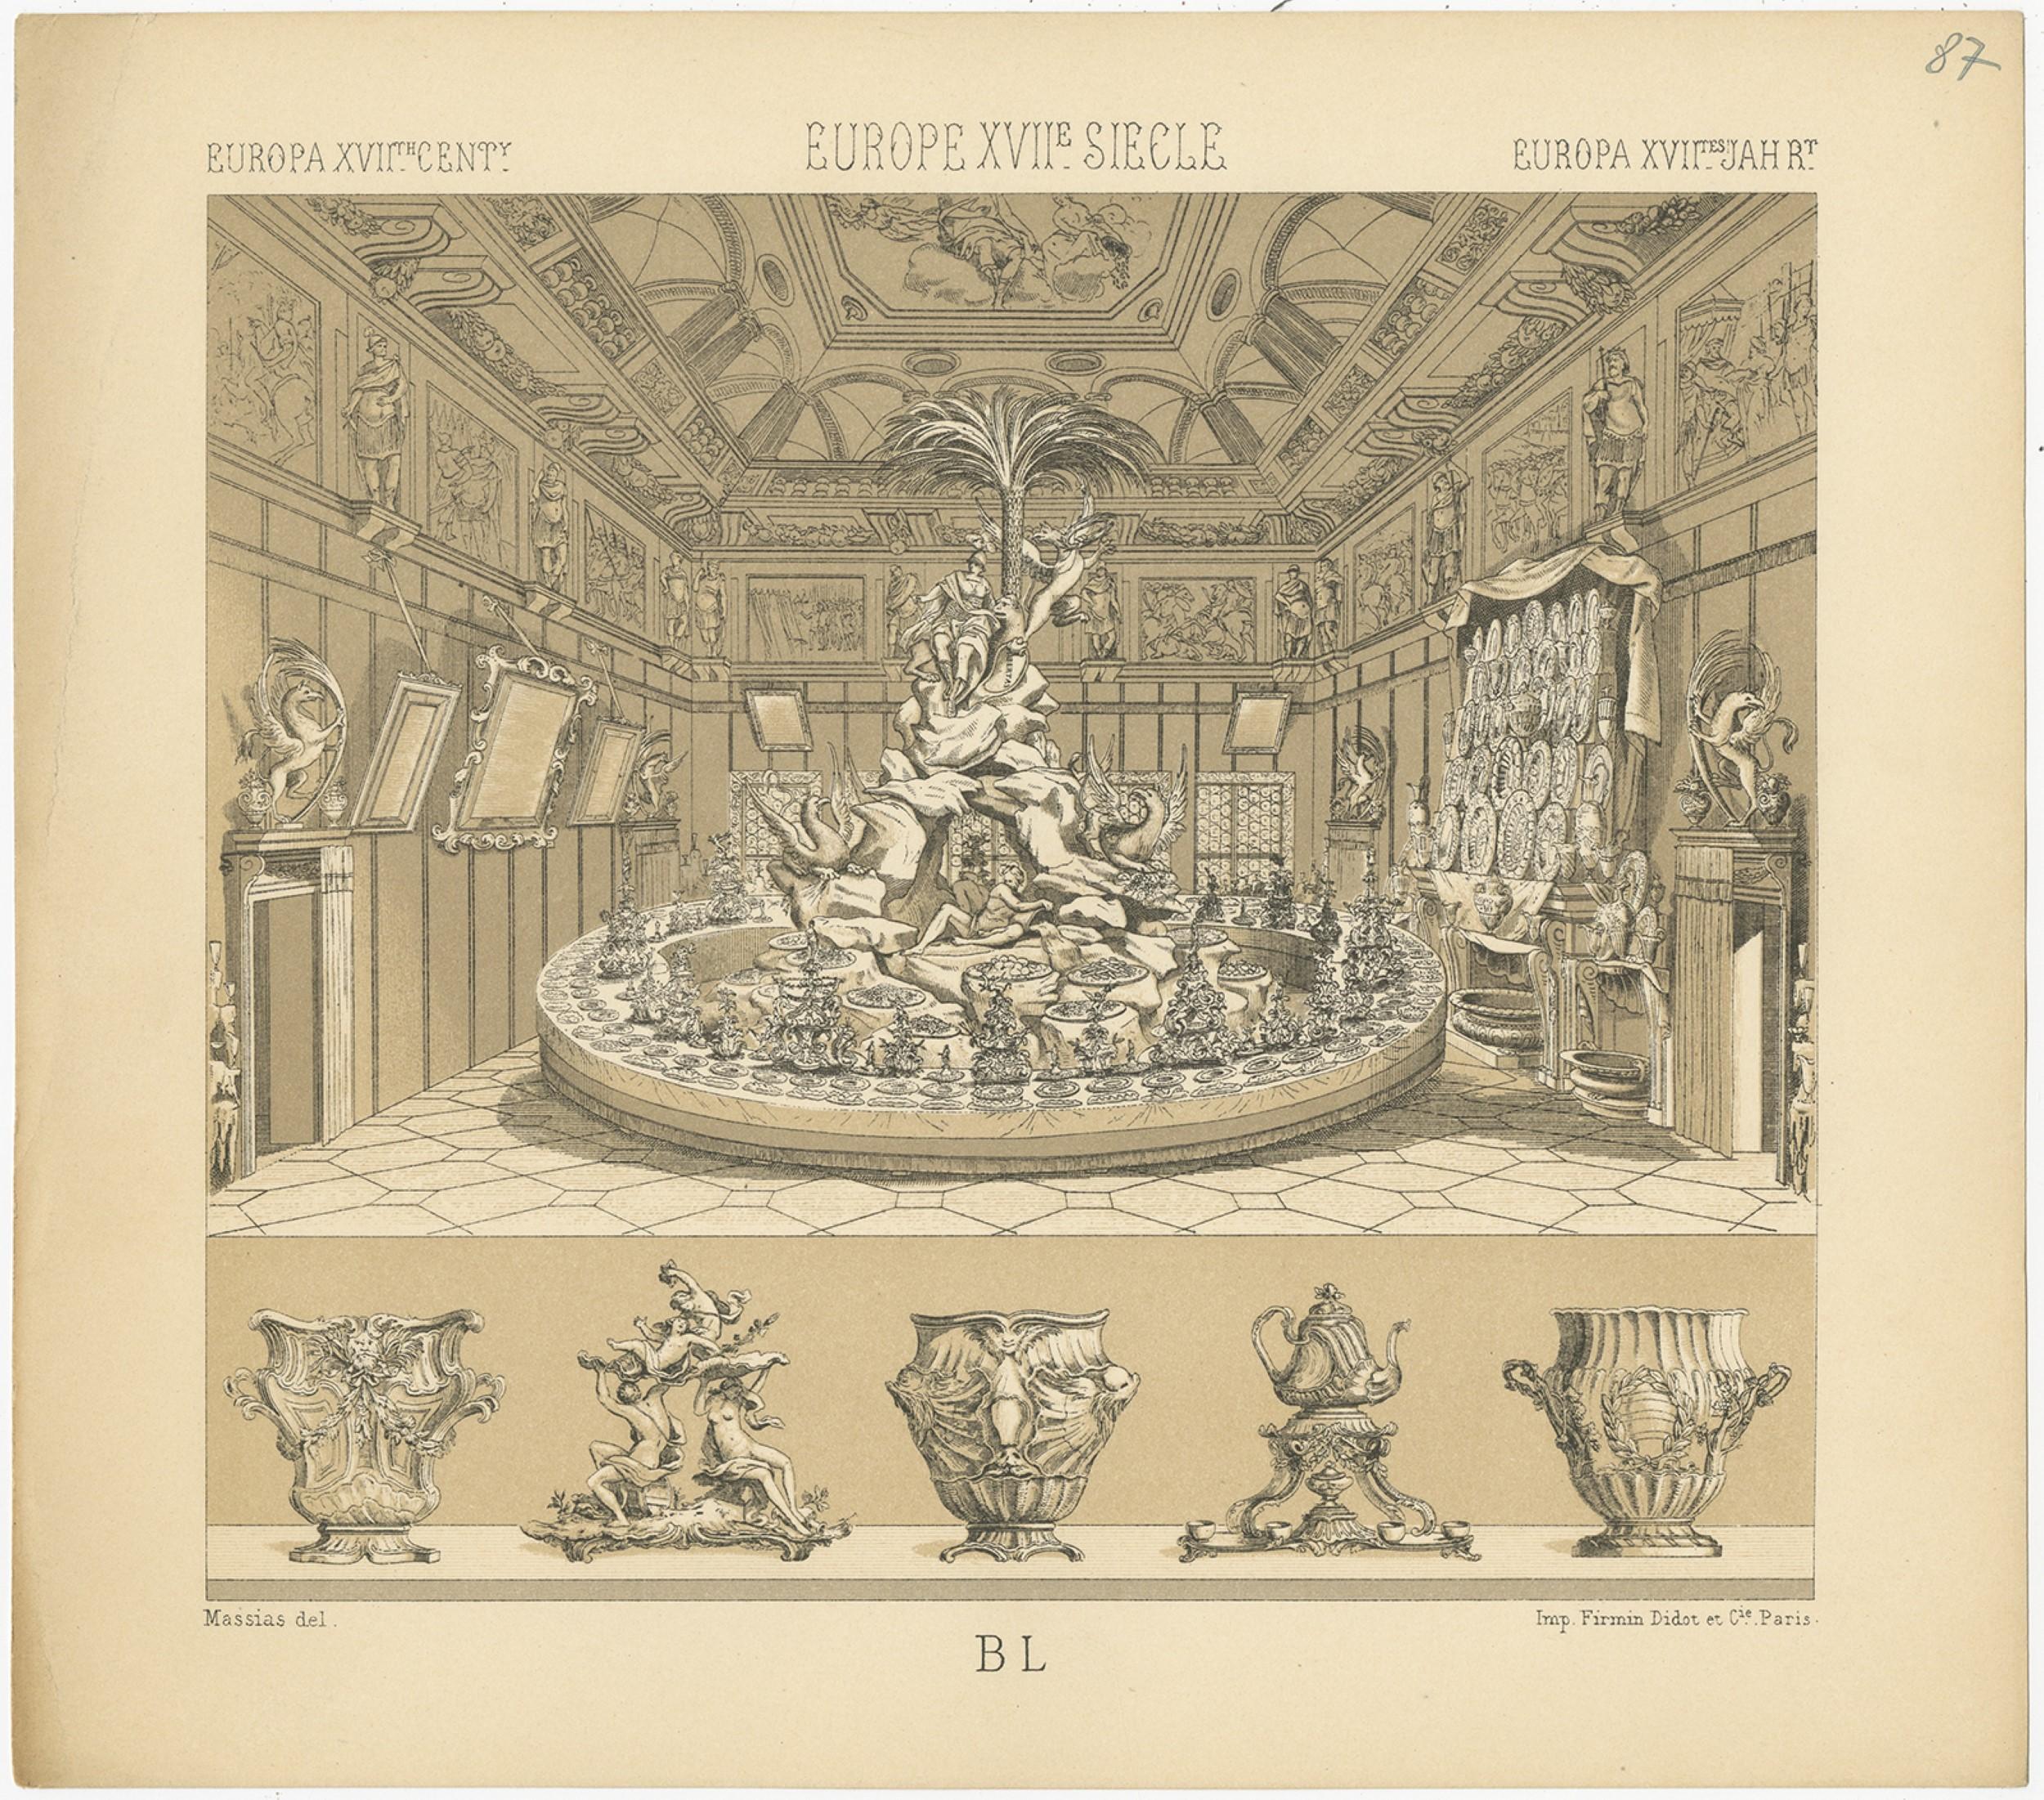 Antique print titled 'Europa XVIIth Cent - Europe XVIIe Siecle - Europa XVIItes Jahr'. Chromolithograph of European decorative objects. This print originates from 'Le Costume Historique' by M.A. Racinet. Published circa 1880.